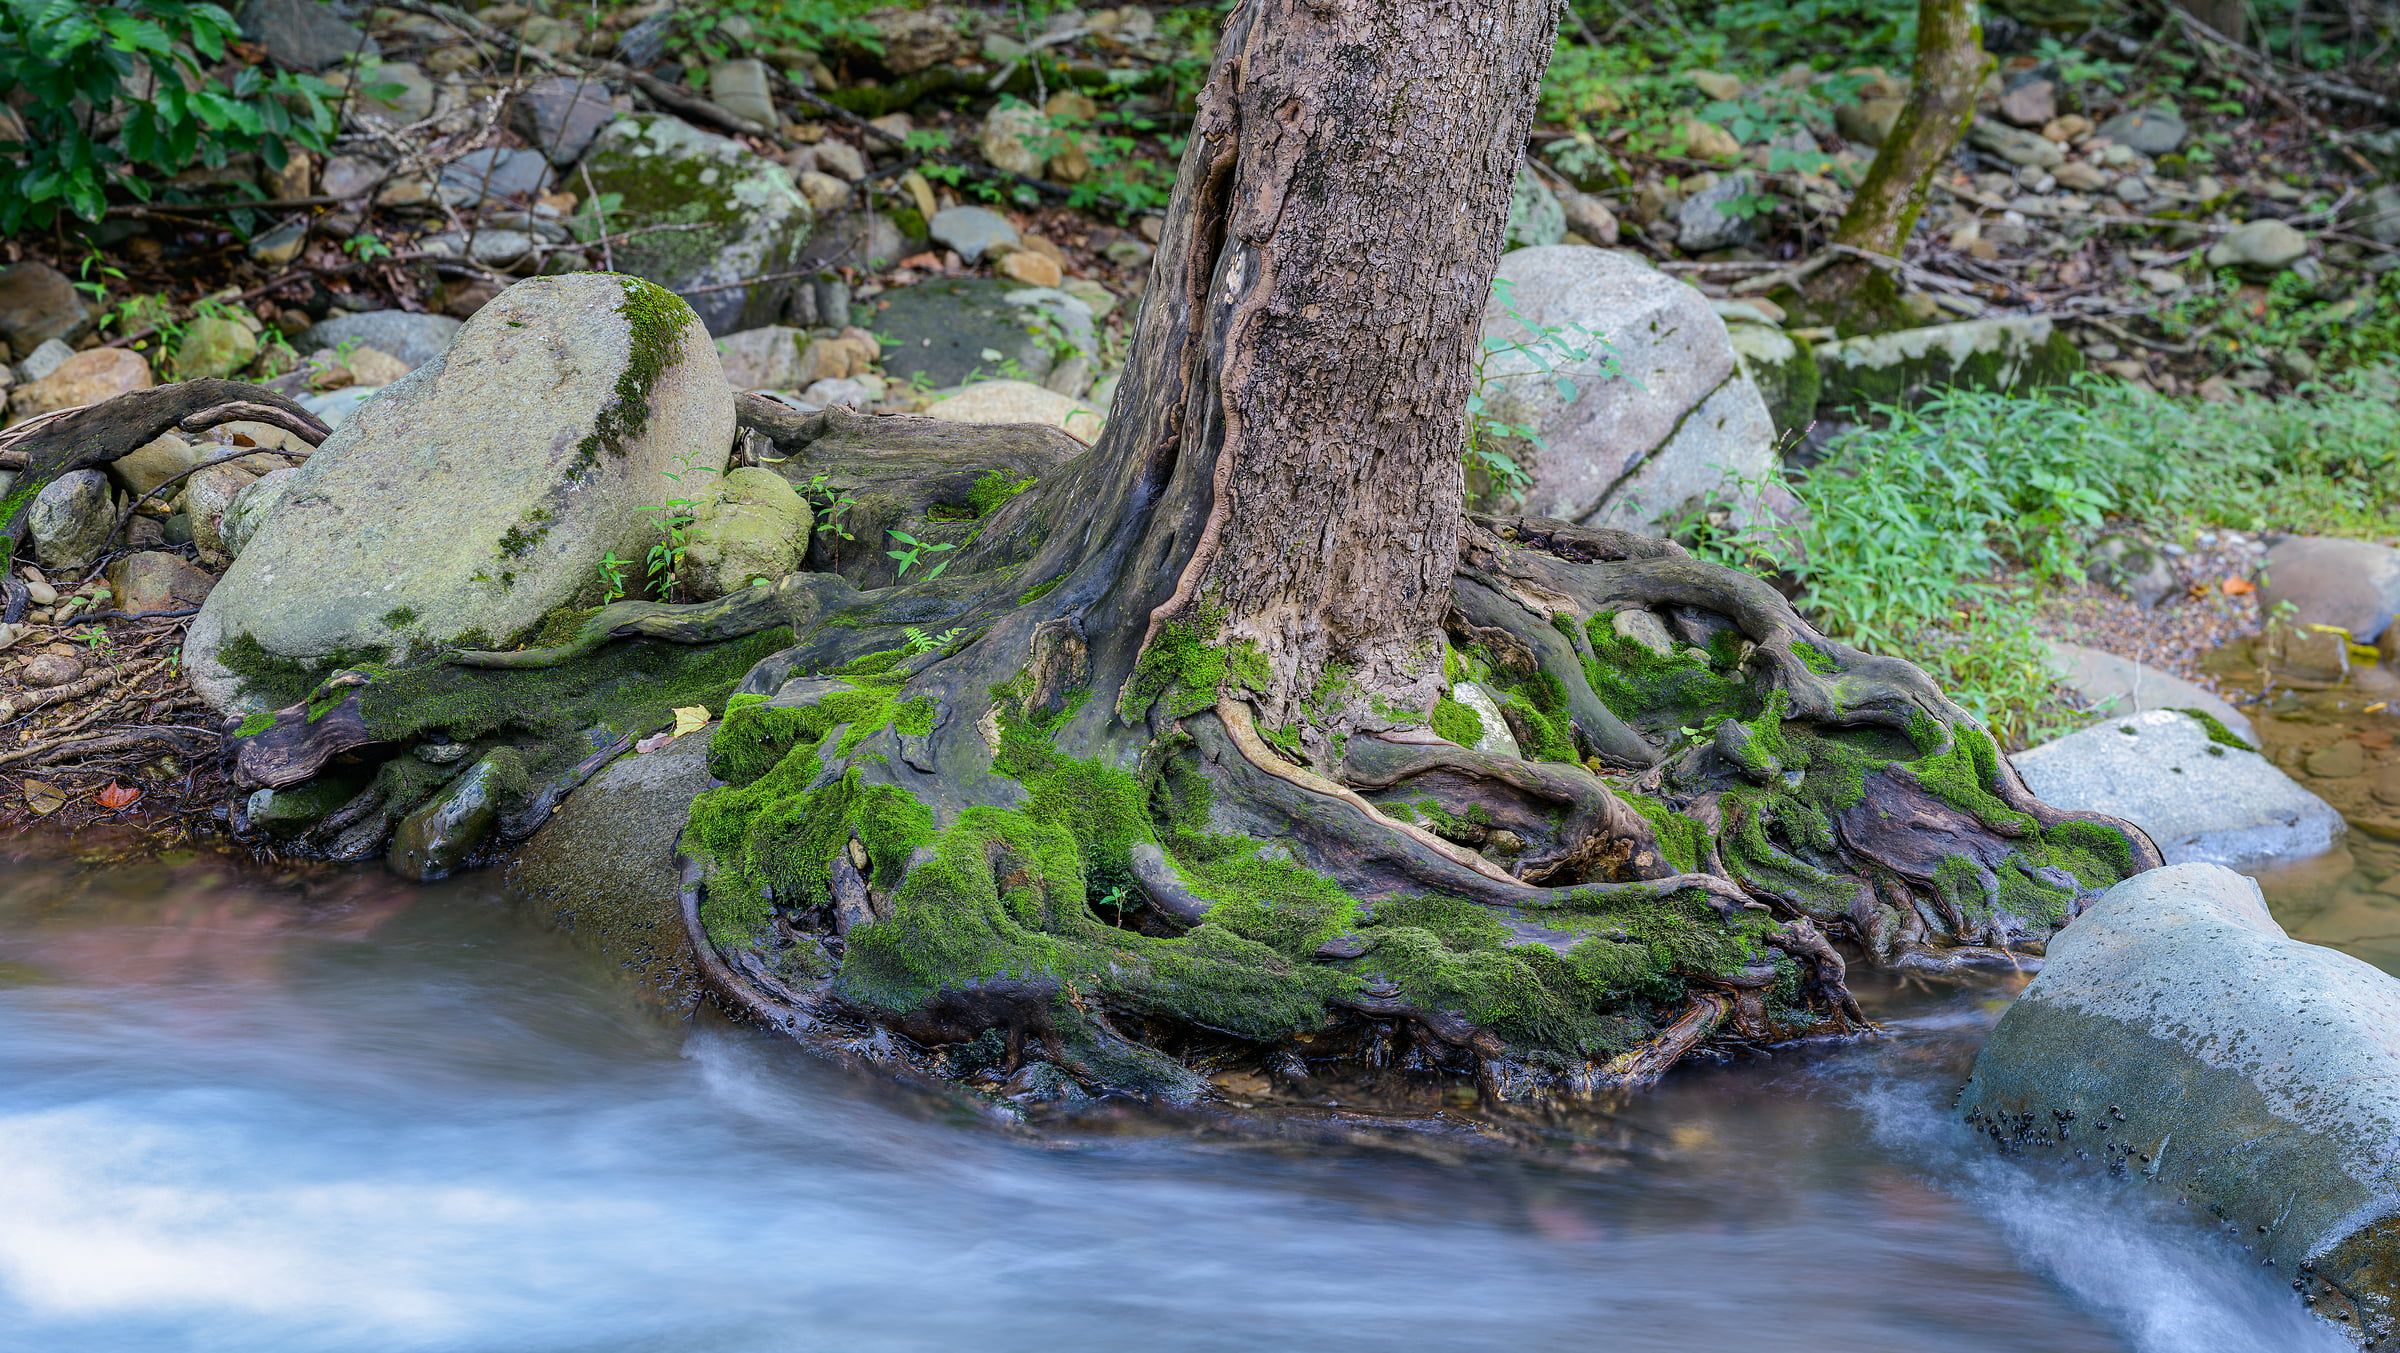 551 megapixels! A very high resolution, large-format VAST photo print of a tree trunk along the banks of a stream; nature photograph created by Tim Lo Monaco in Swift Run, Standardsville, Shenandoah, Virginia.